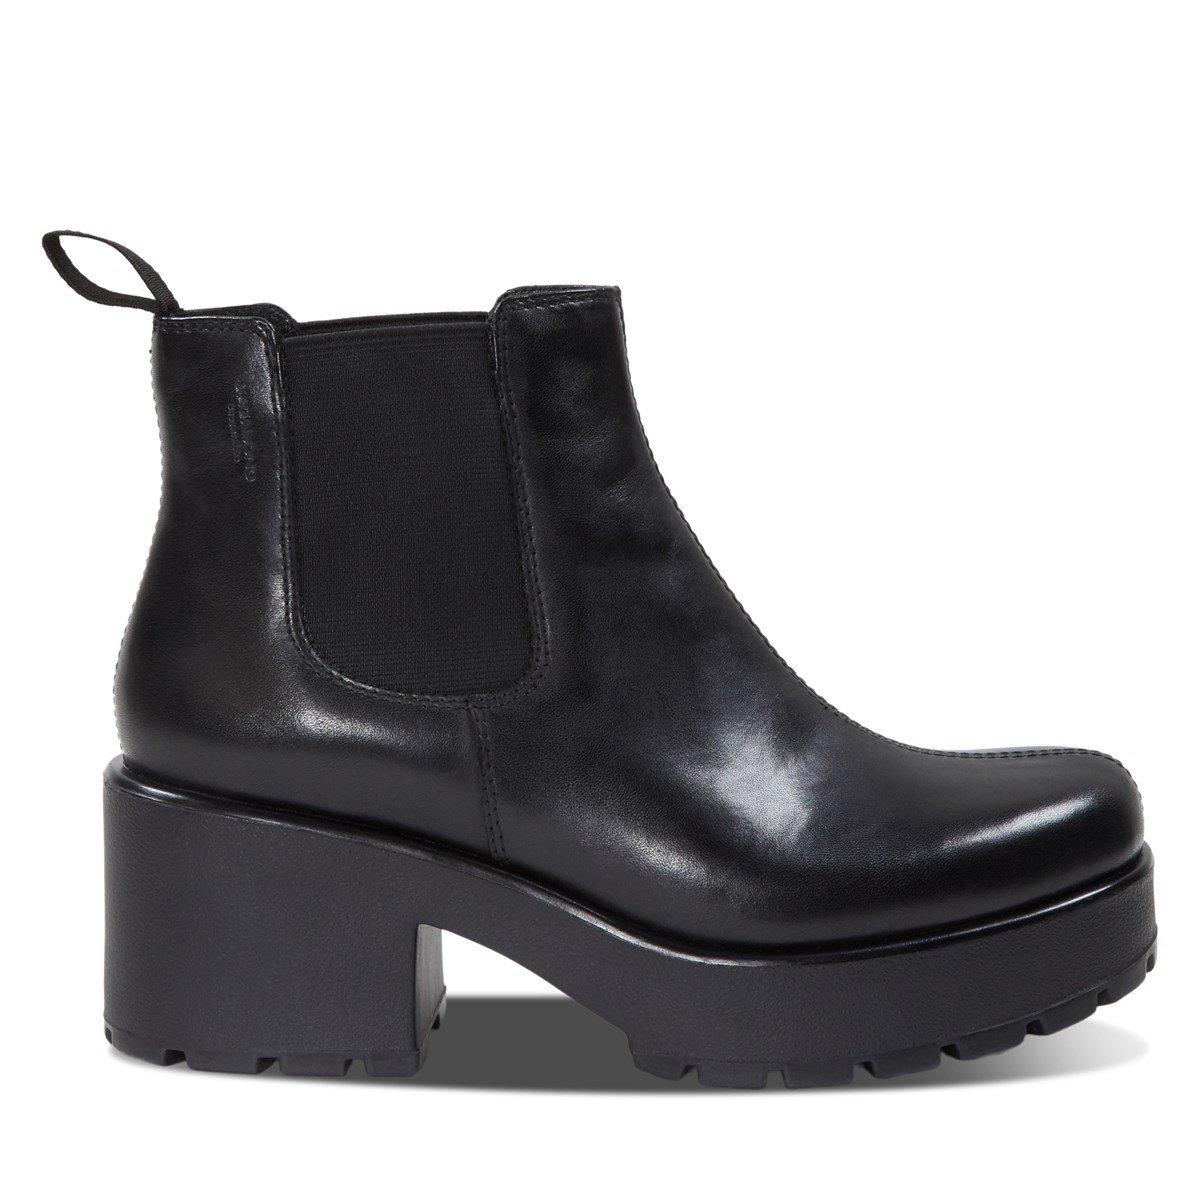 Women's Dioon Chelsea Heeled Boots in Black